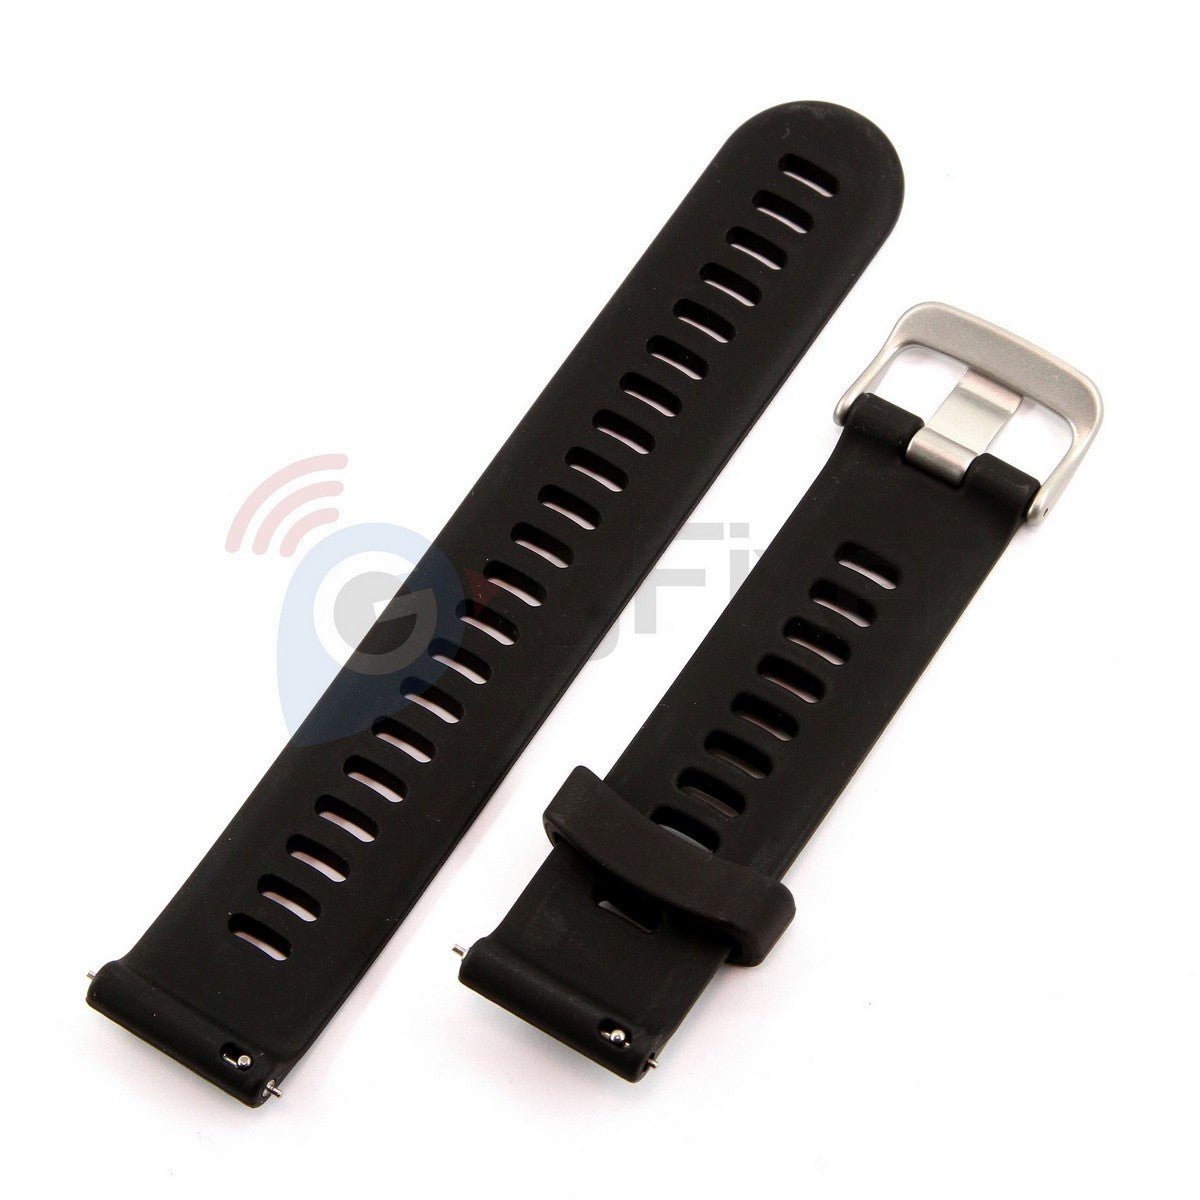 Silicone band  for Garmin Forerunner 645 Black. QuickFit 20mm. OEM (without screwdrivers and box) New